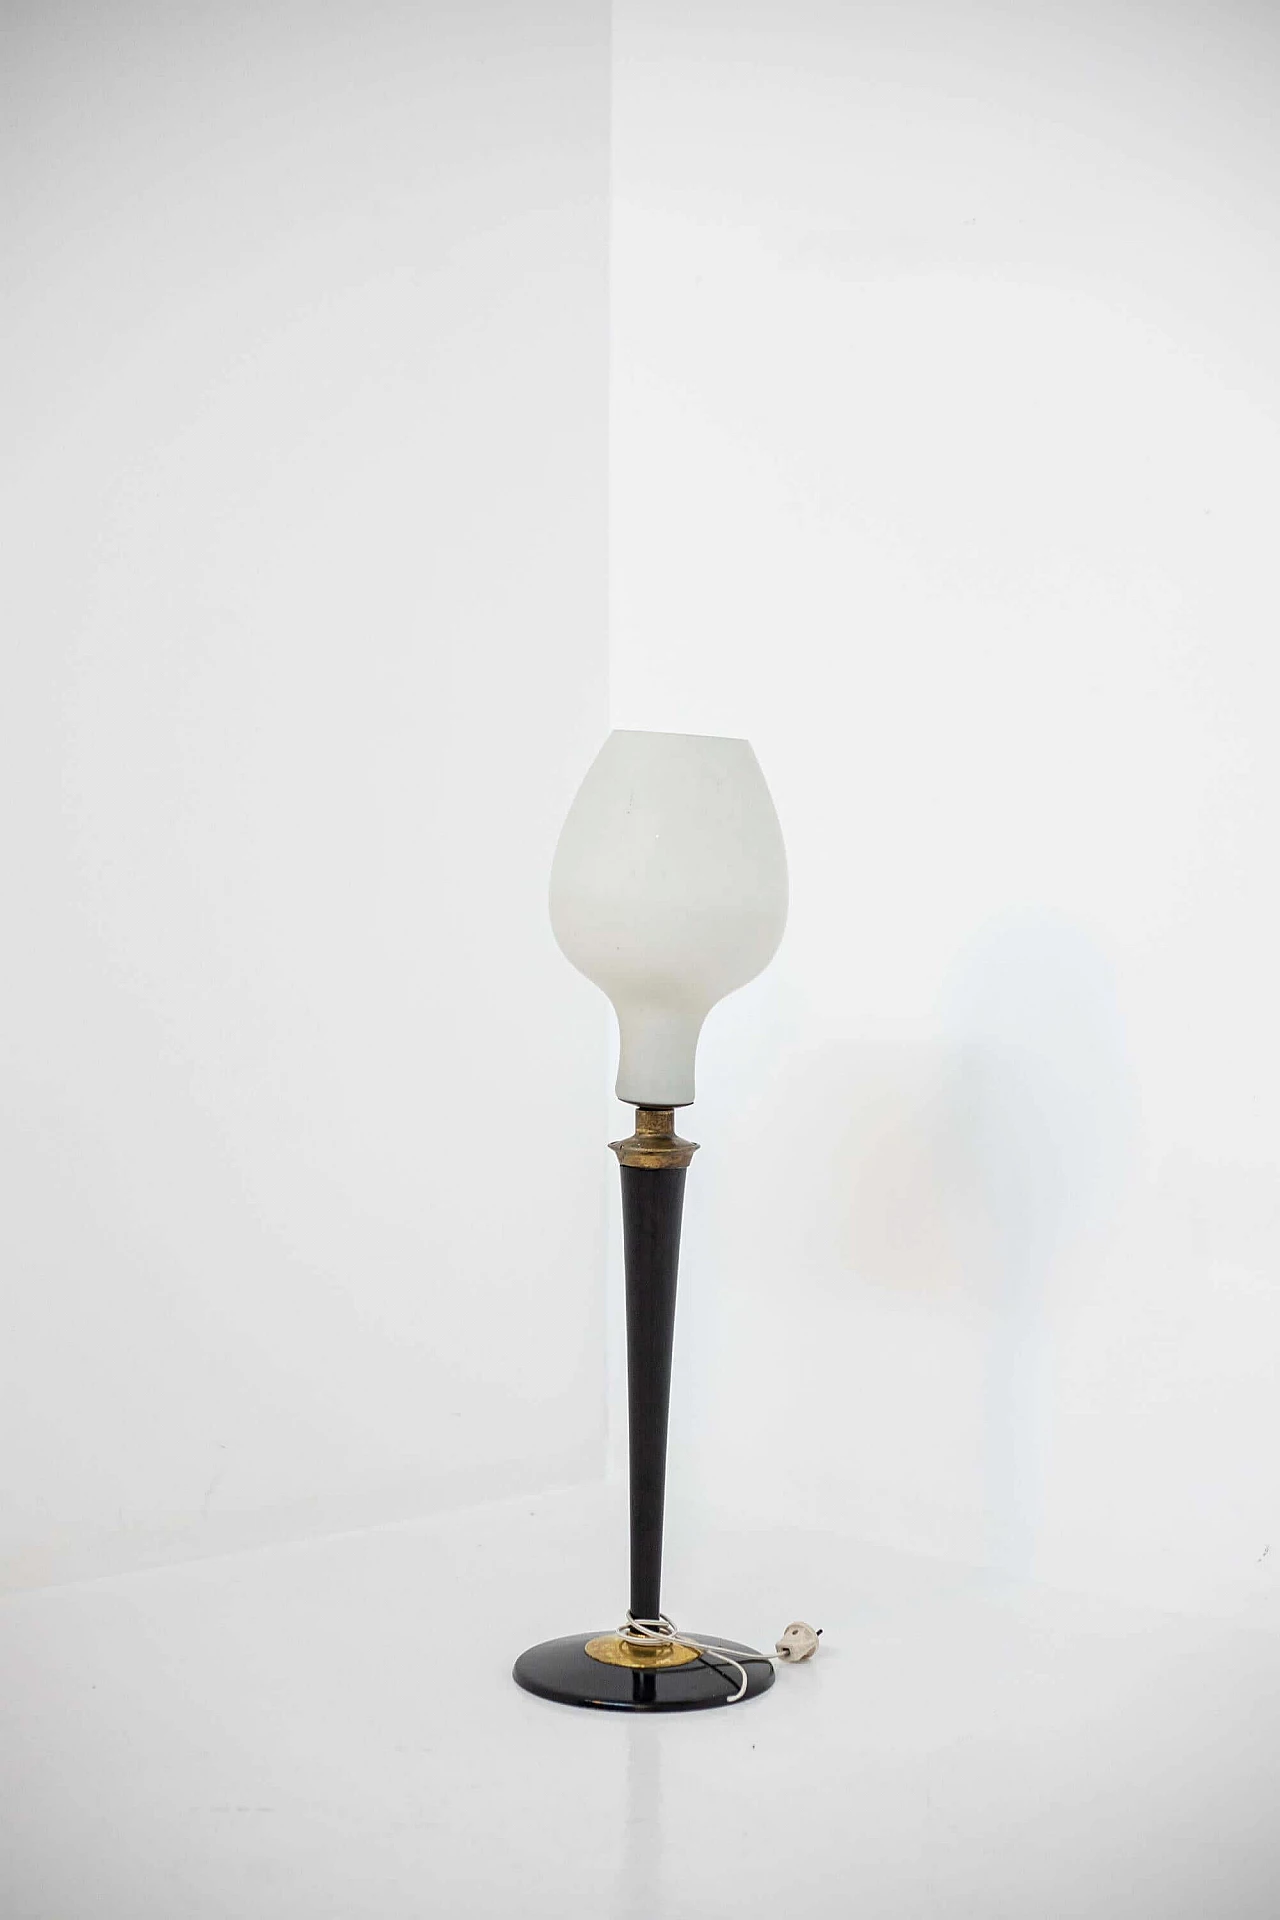 Opal glass table lamp with wood and brass frame, 1950s 1400573